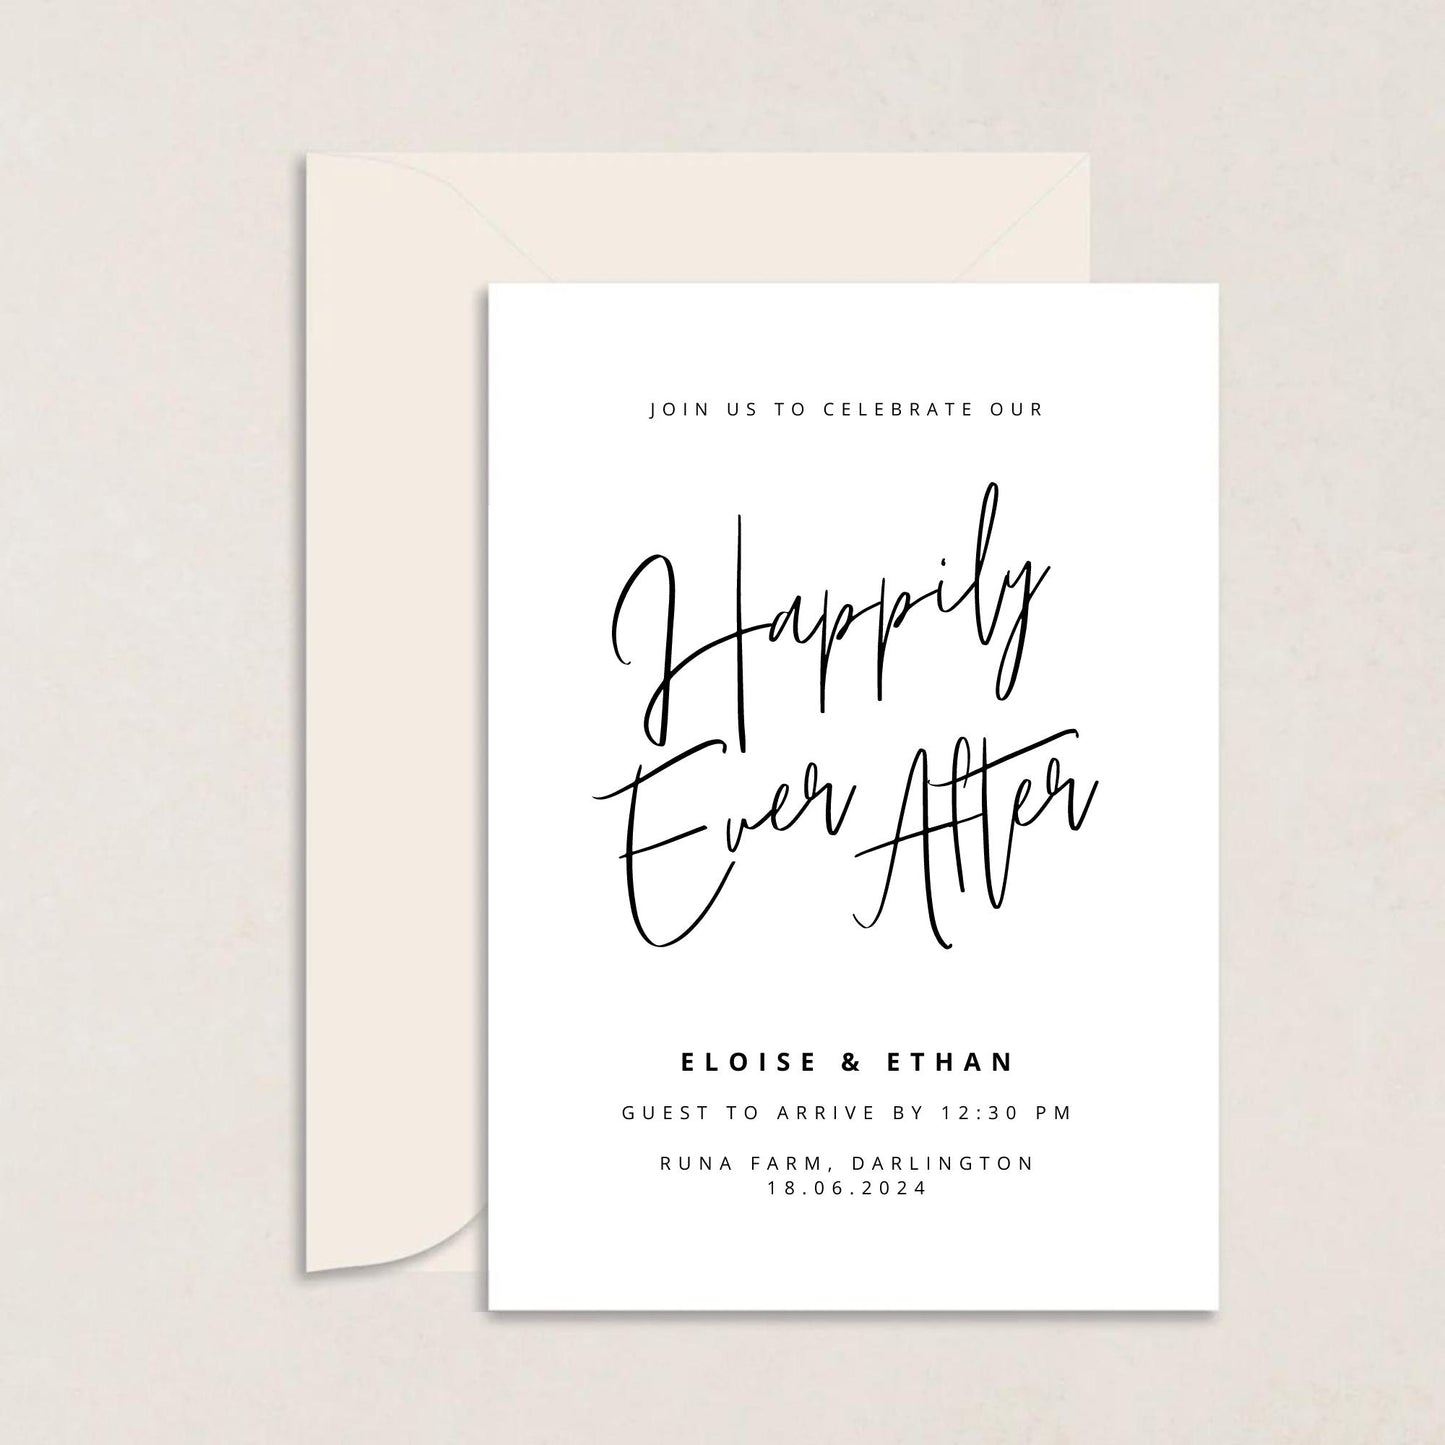 ELOISE Wedding Invitations - Wedding Invitations available at The Ivy Collection | Luxury Wedding Stationery